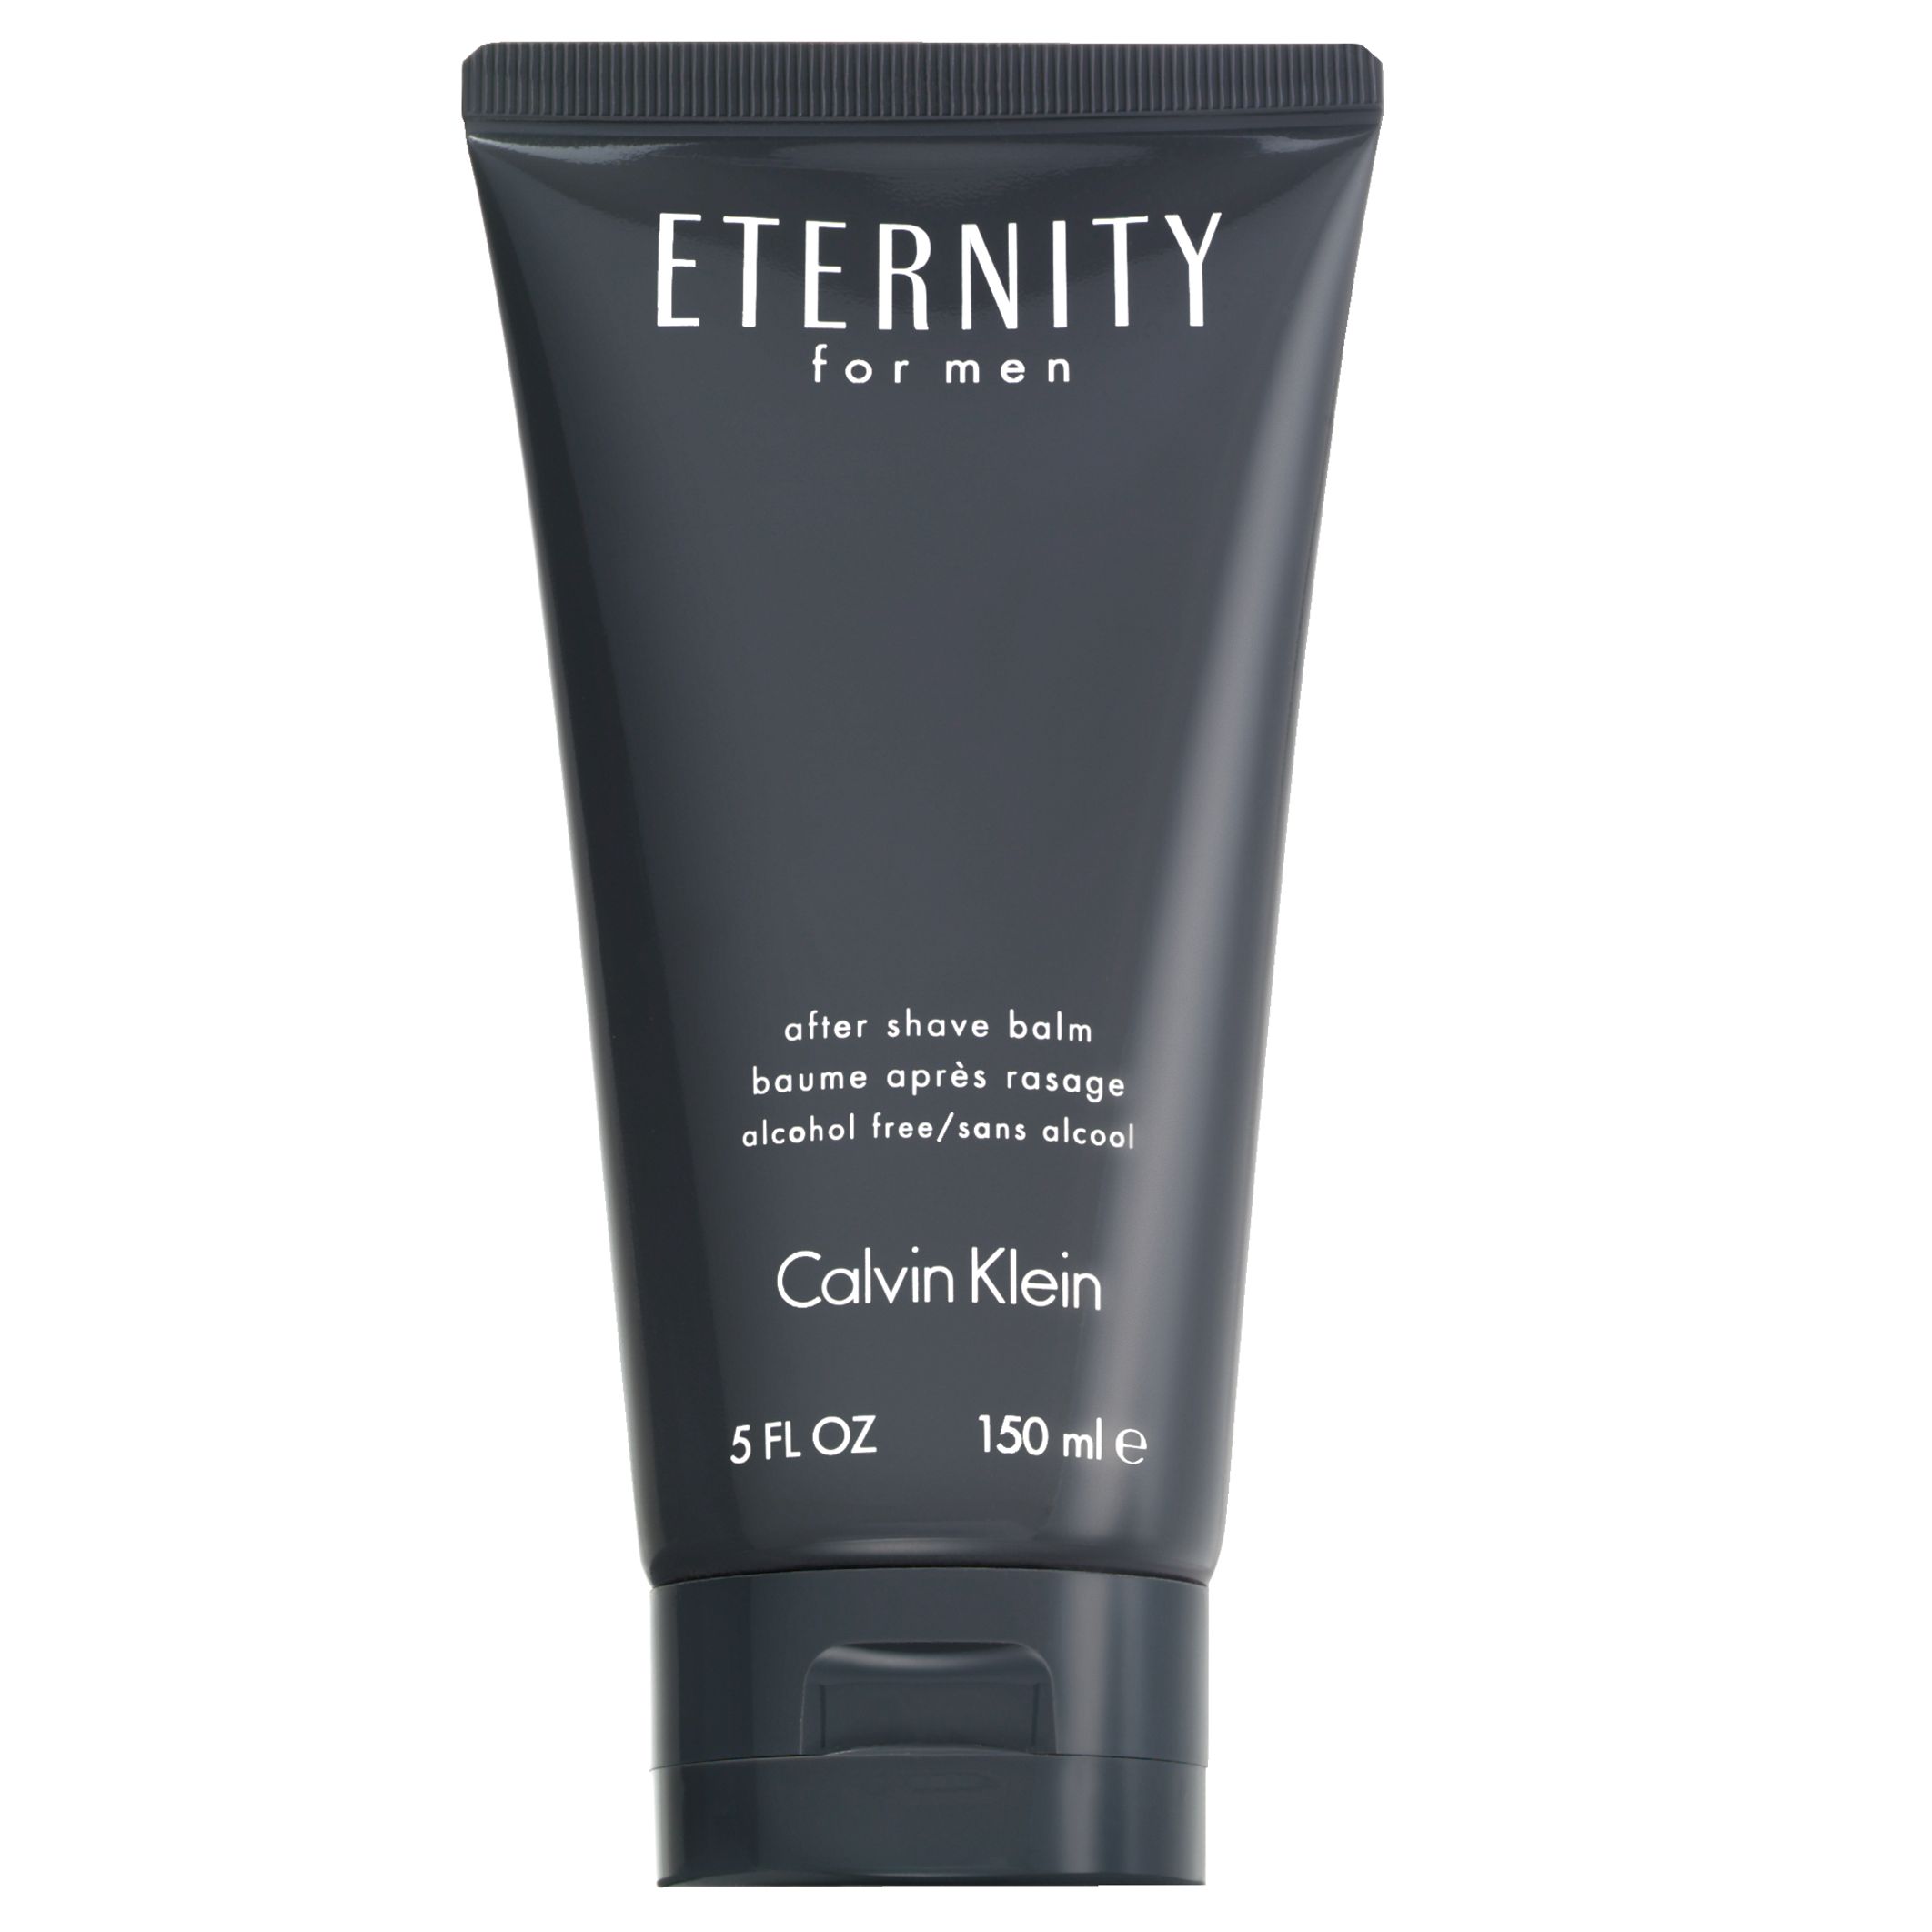 Eternity for Men Aftershave Balm- 150ml